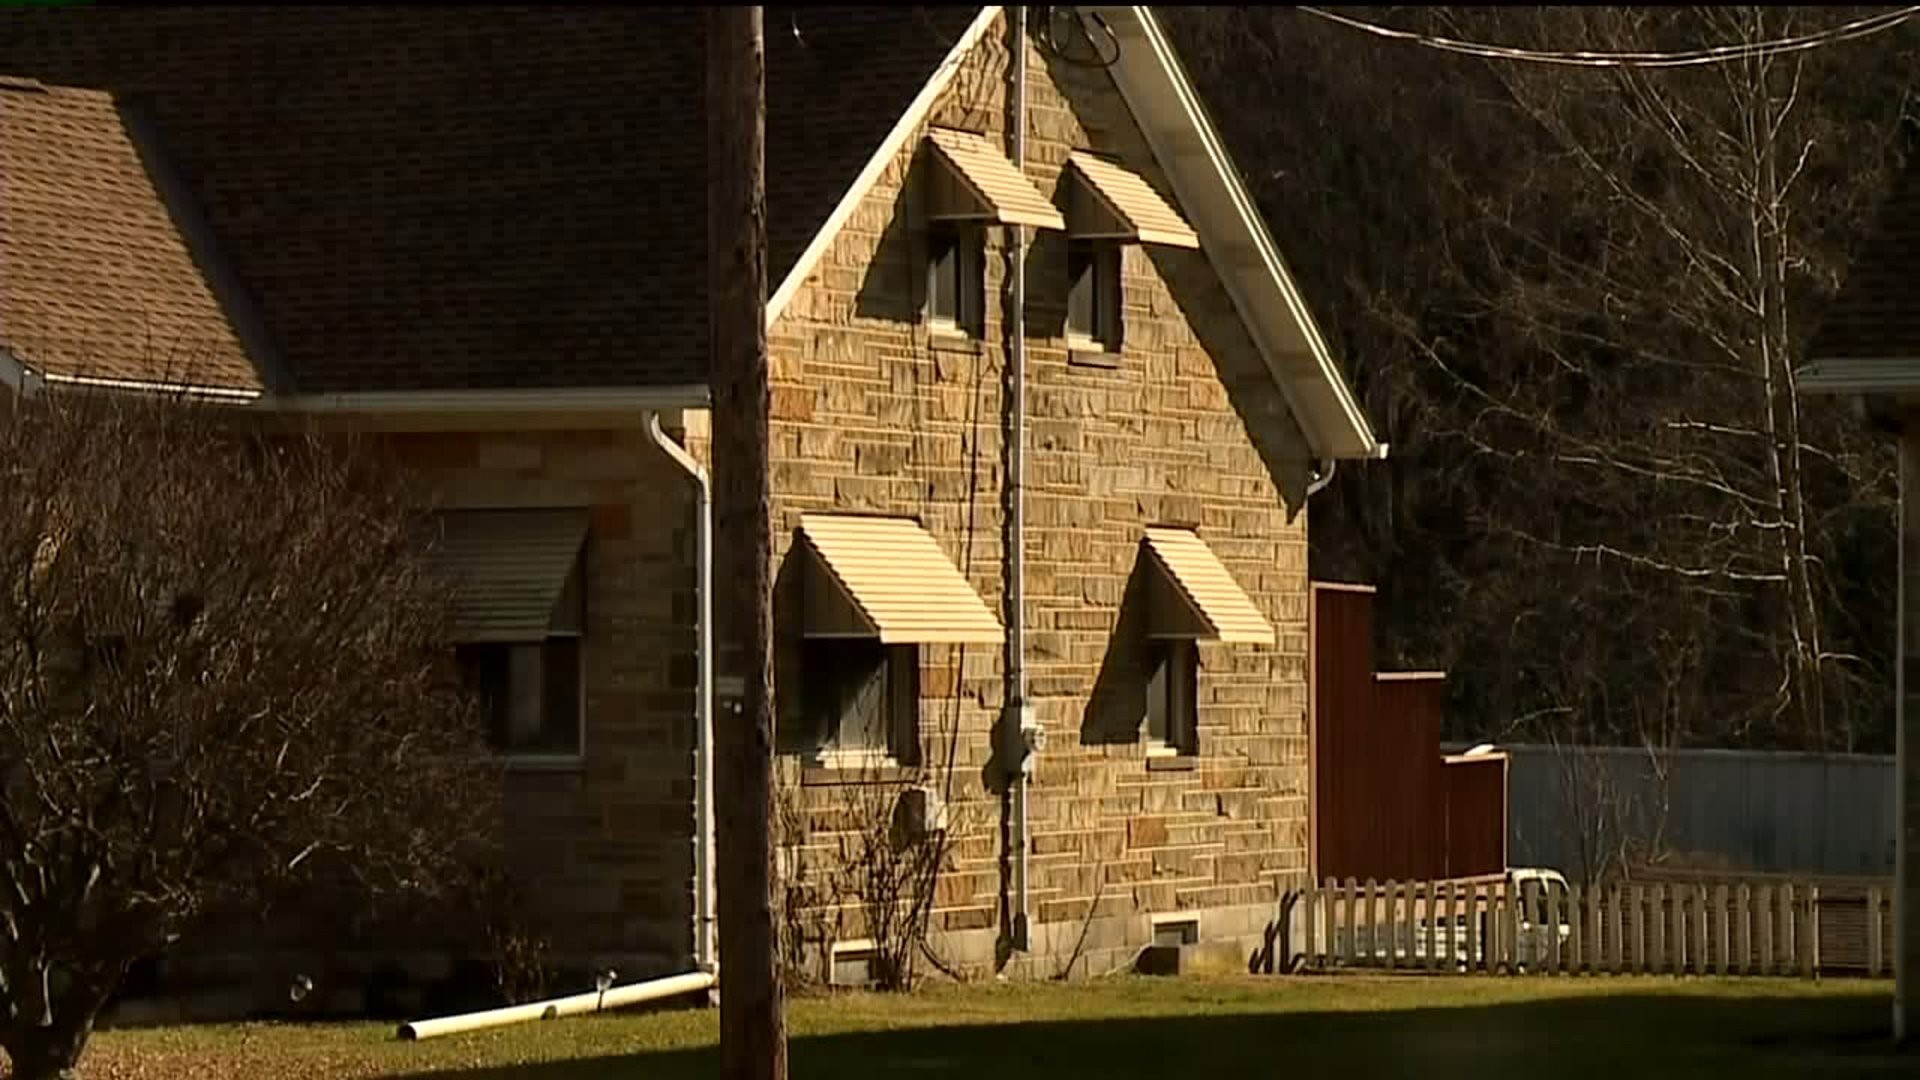 Two Dead in Murder-Suicide in Carbon County